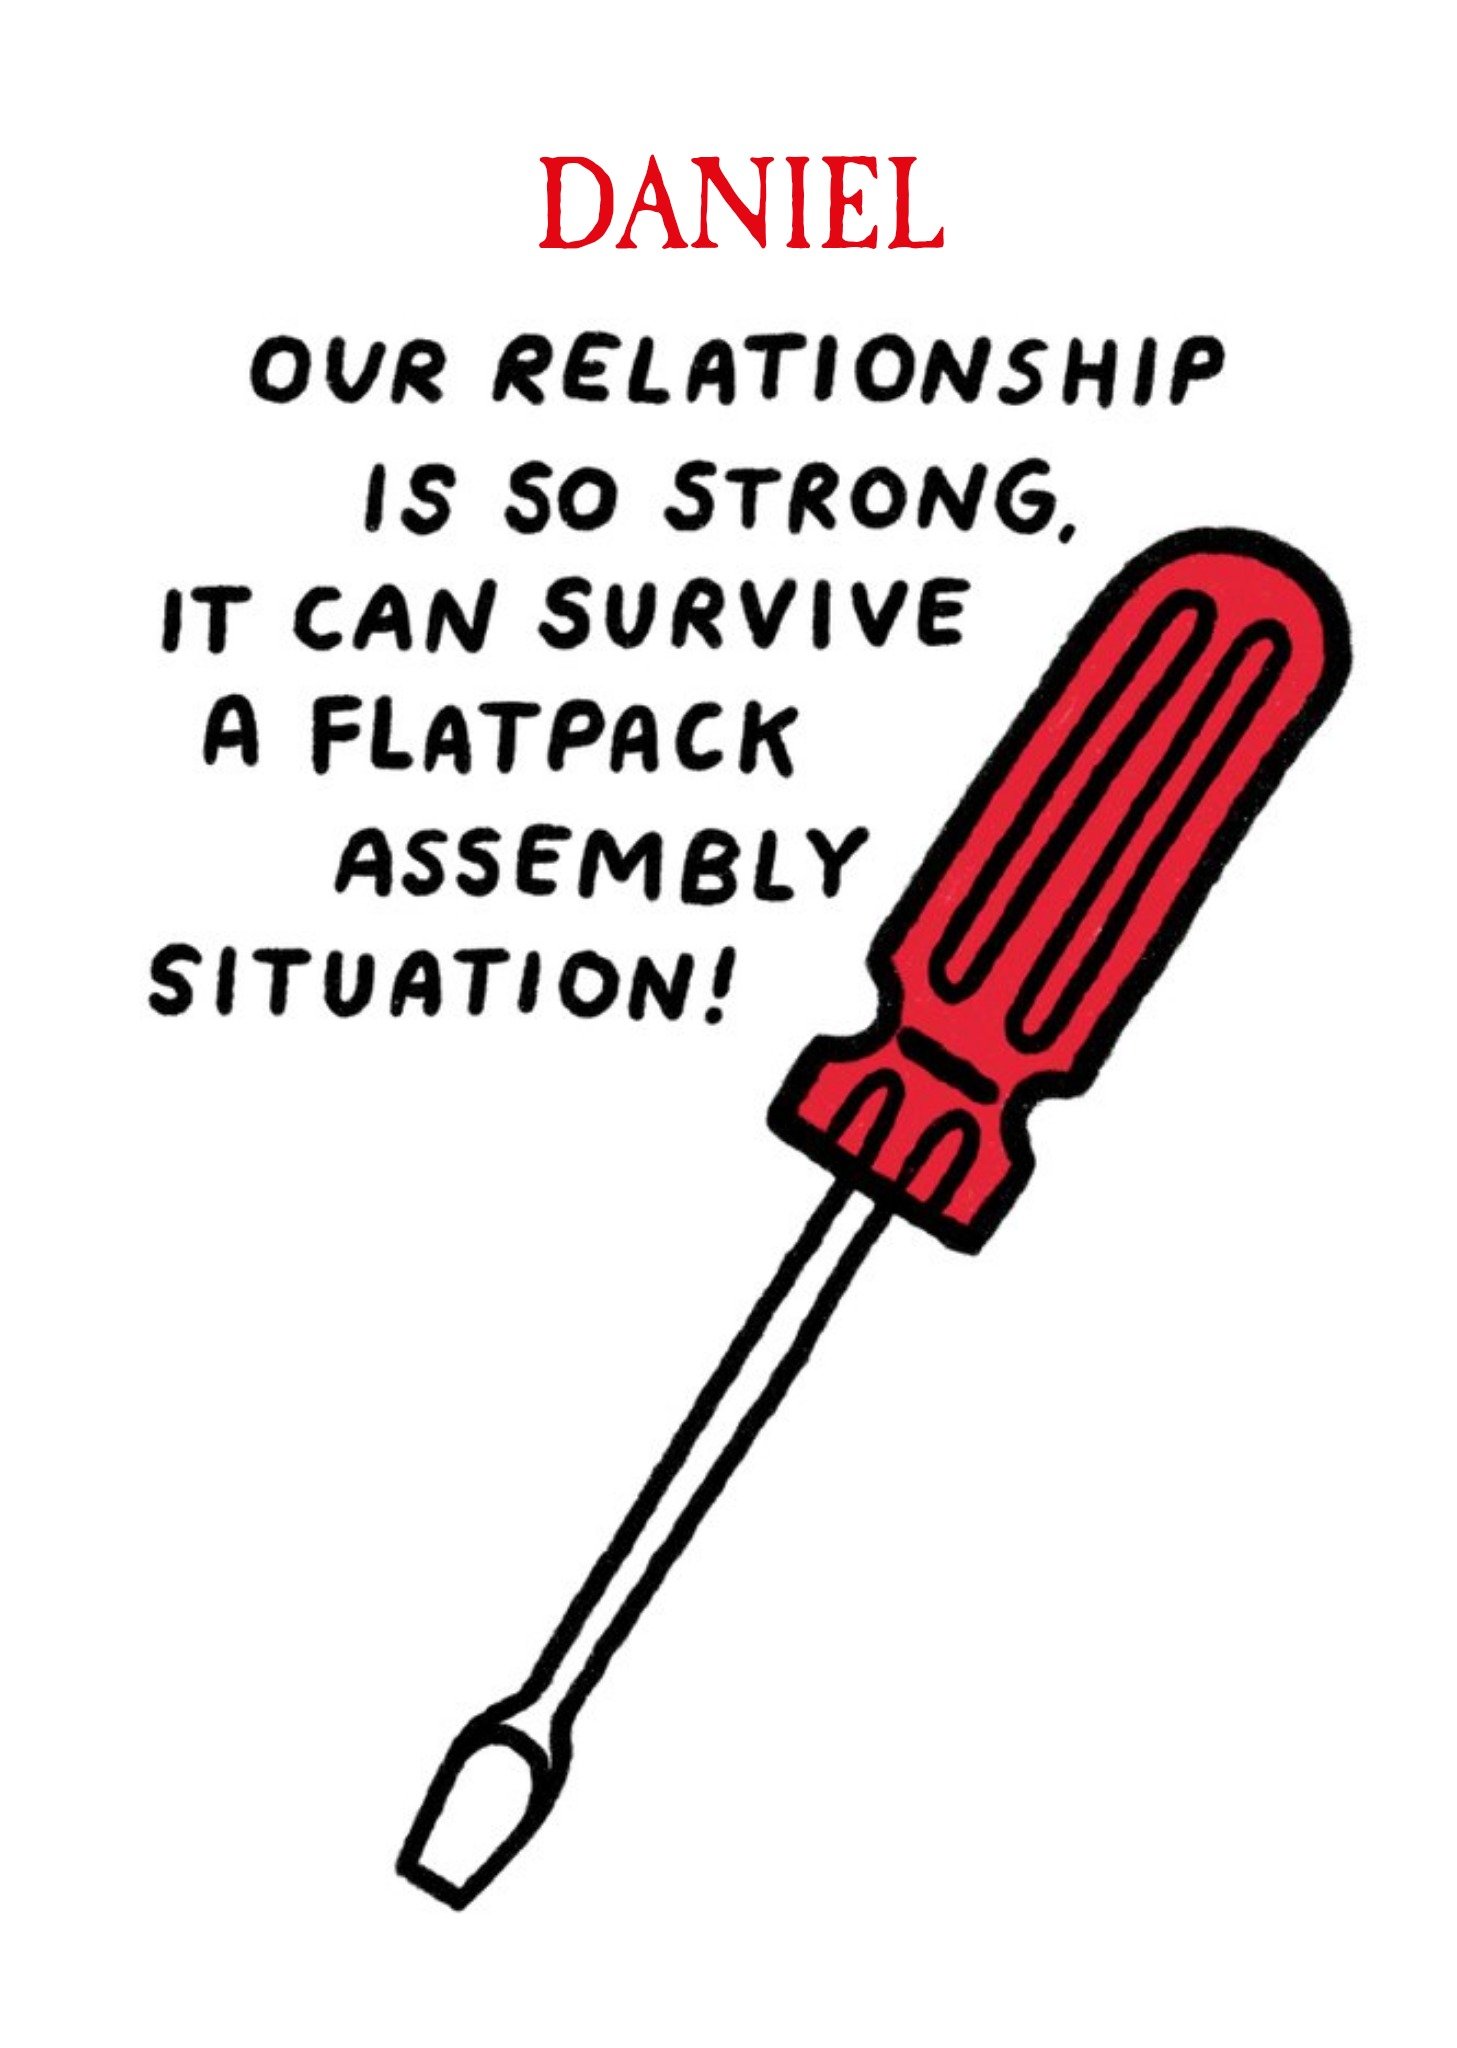 Moonpig Illustration Of A Screwdriver Humorous Valentine's Day Card Ecard